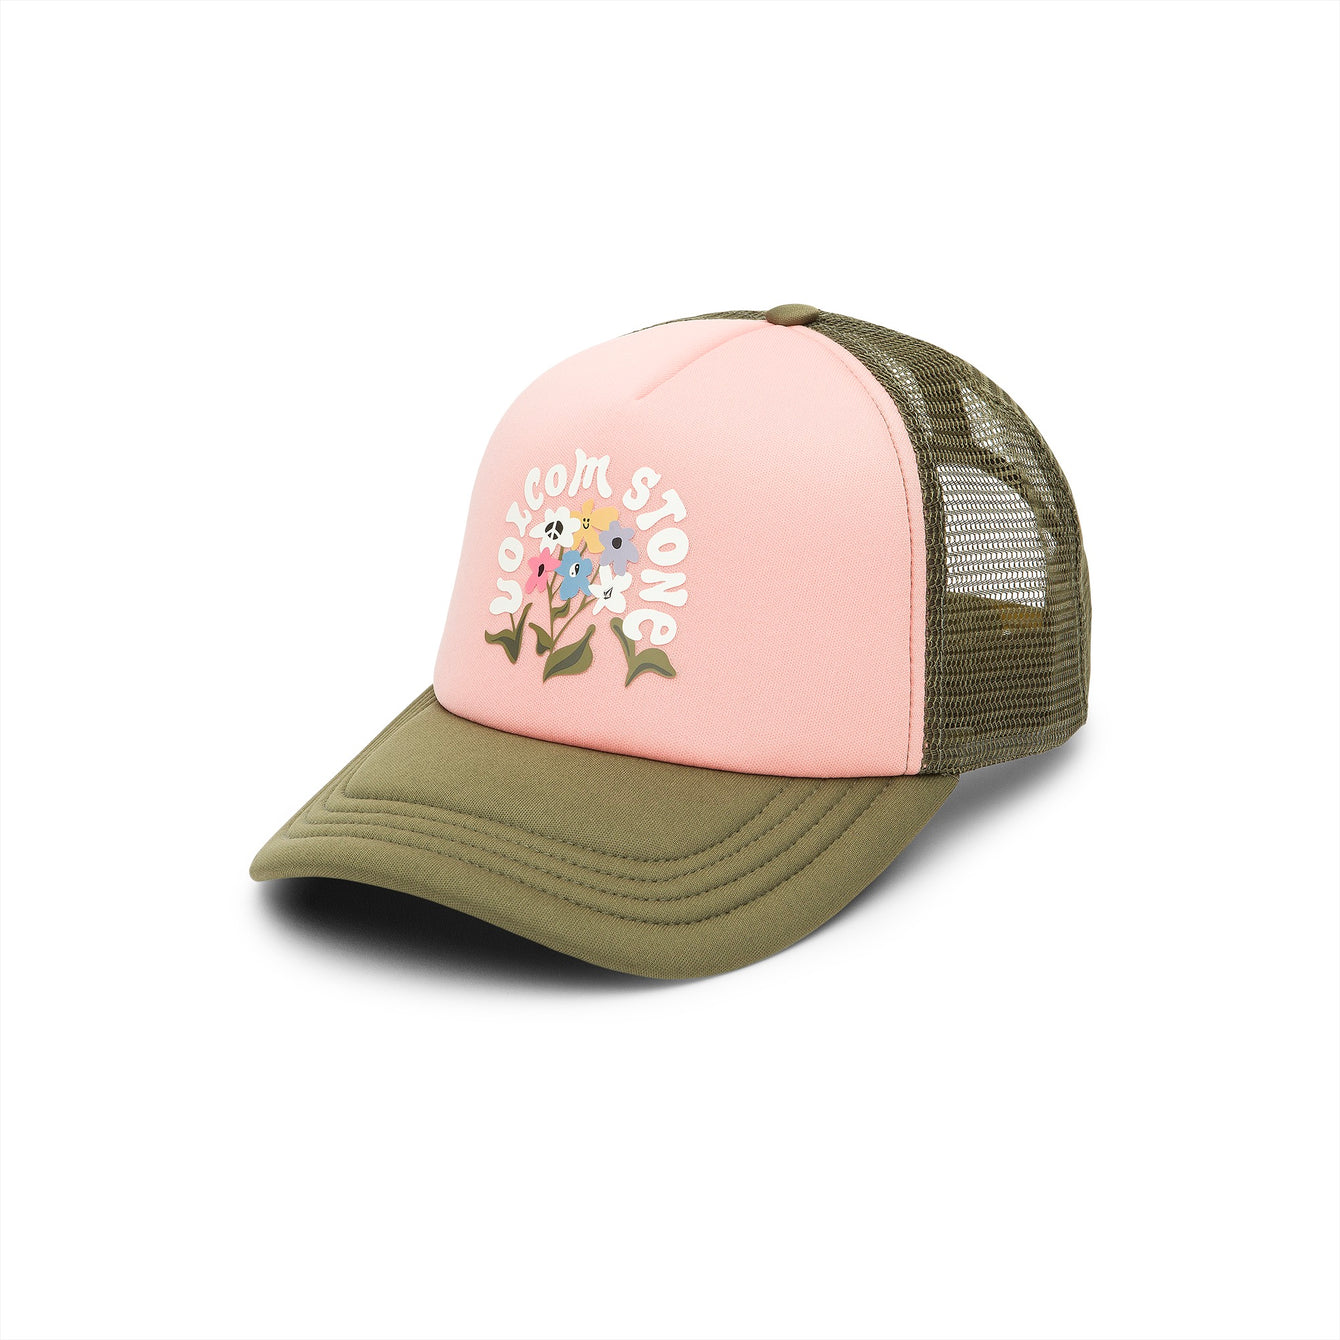 HEY SLIMS HAT - CORAL